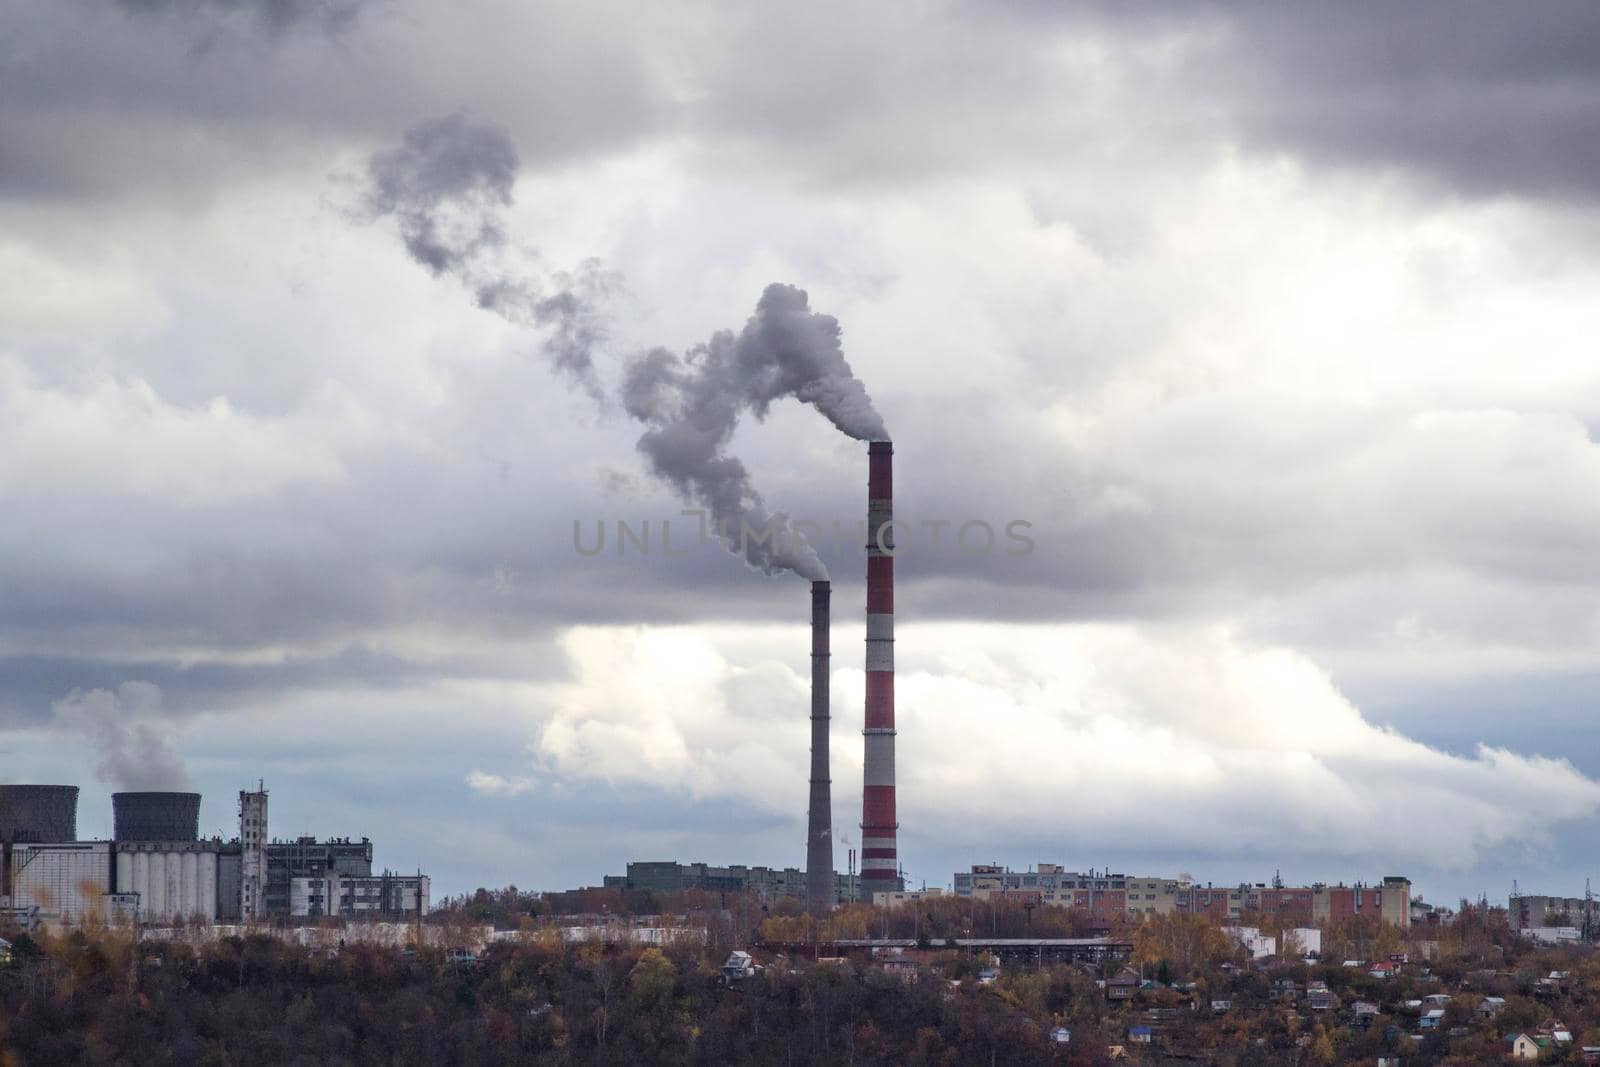 Urban cloudy landscape. Citypipes fuming an industrial area illustrating pollution and production harm.